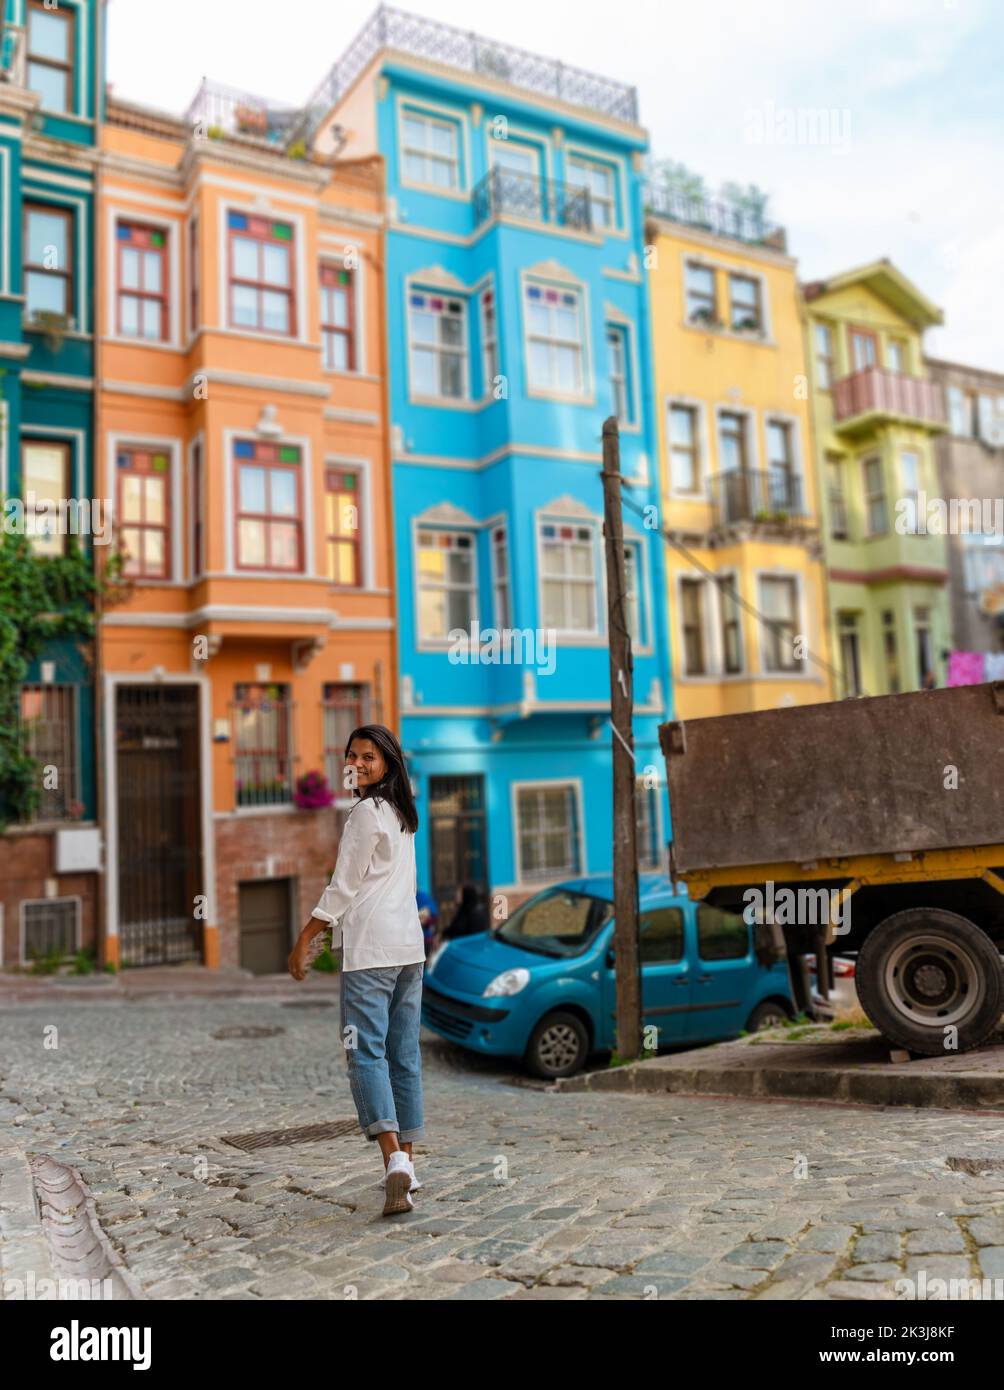 Asian women on city trip Balat district Istanbul Turkey, colorful homes and houses in the town of Balat with tourists enjoying a beautiful summer day.  Stock Photo